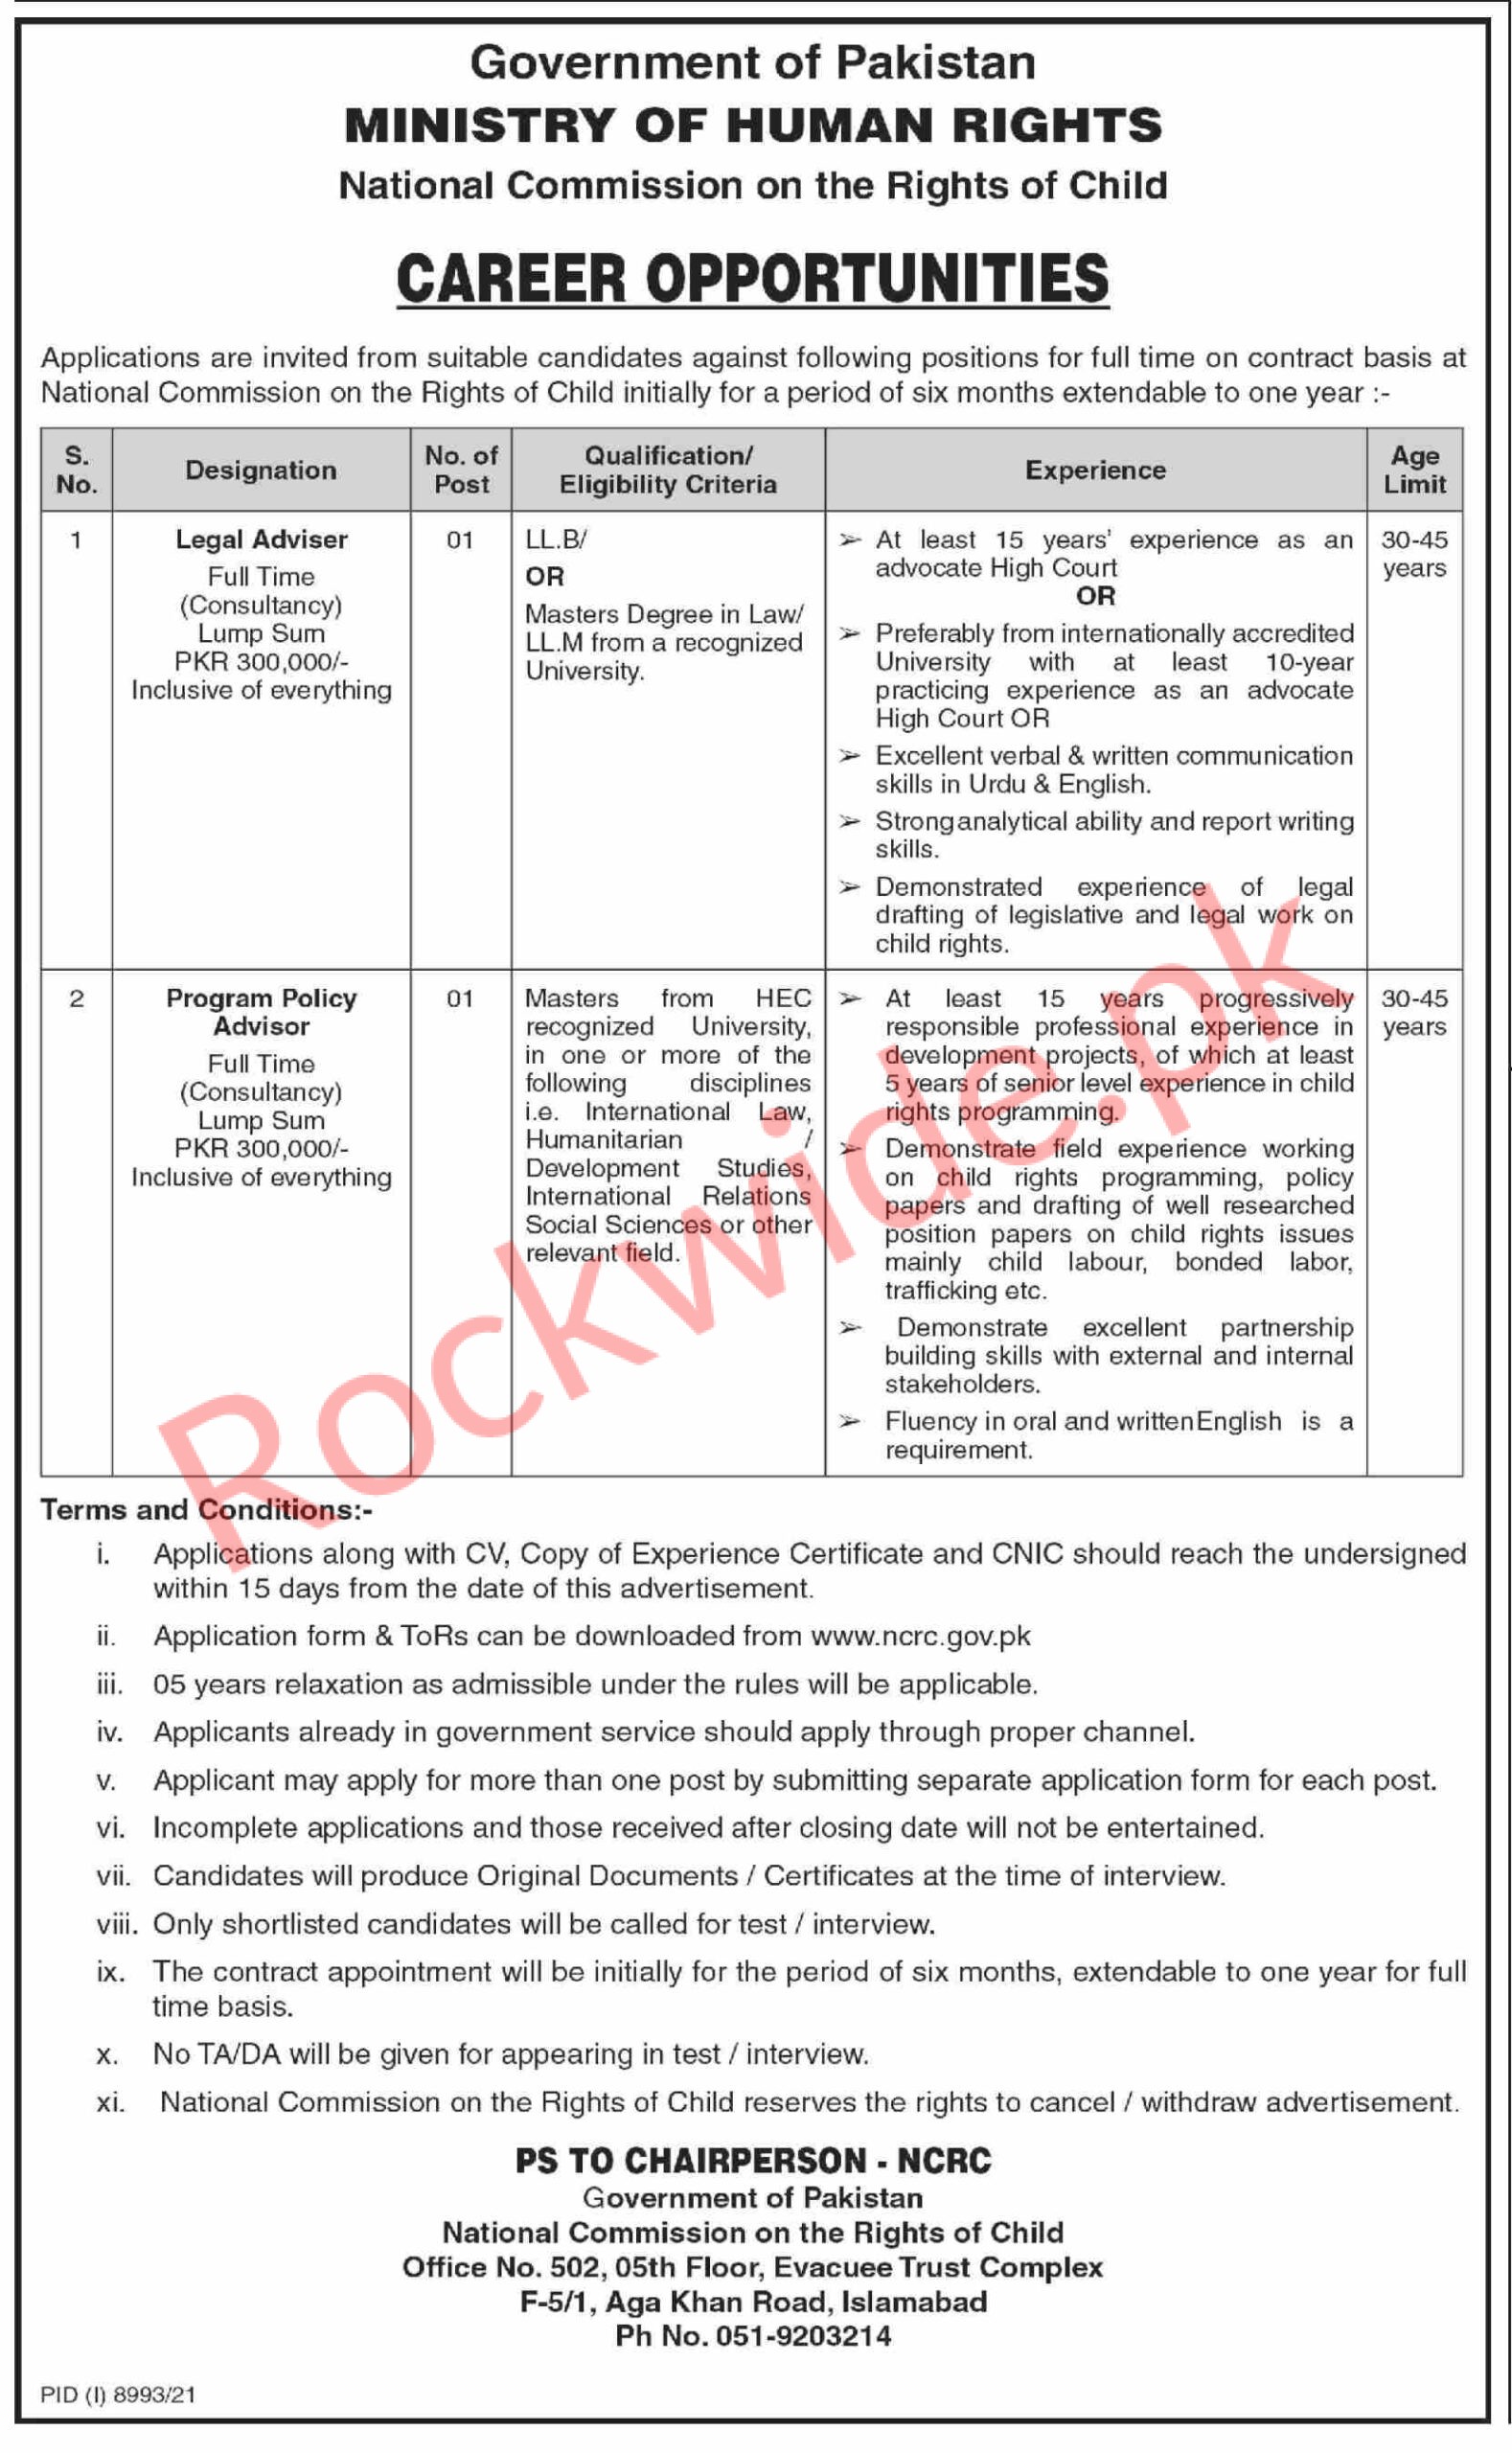 Government of Pakistan Ministry of Human Rights Vacancies in Islamabad